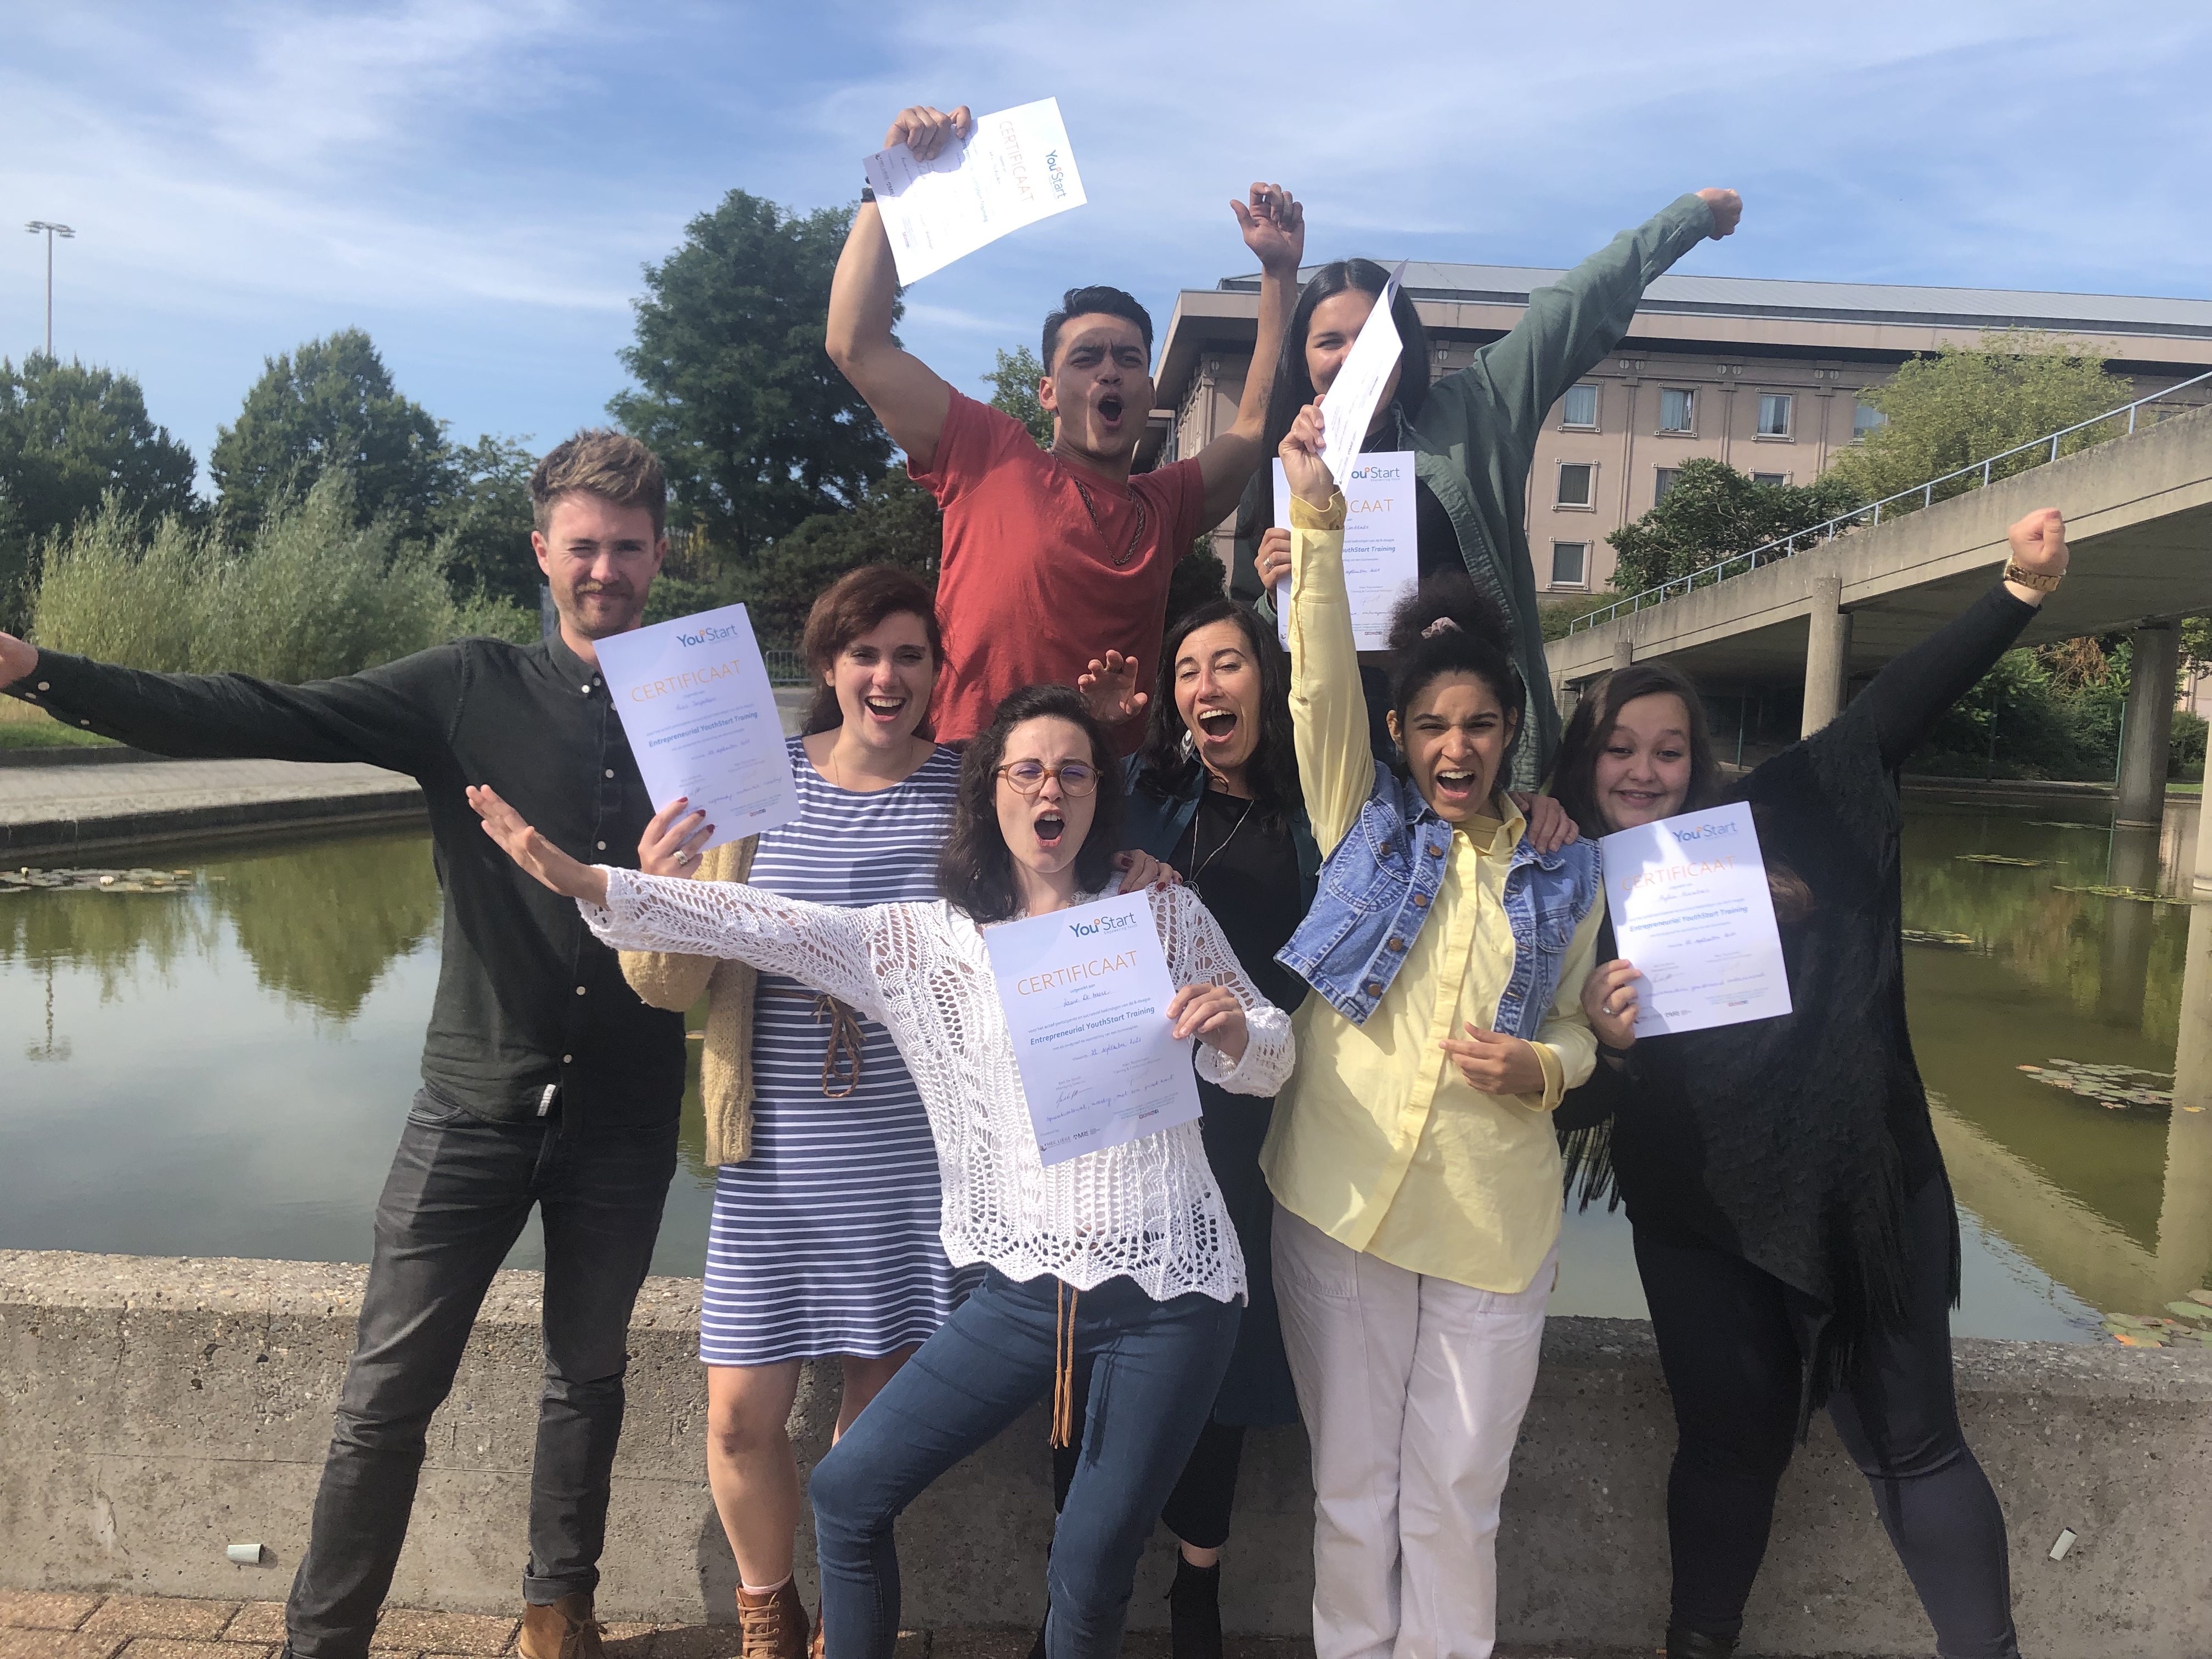 A group of people celebrating and holding up certificates